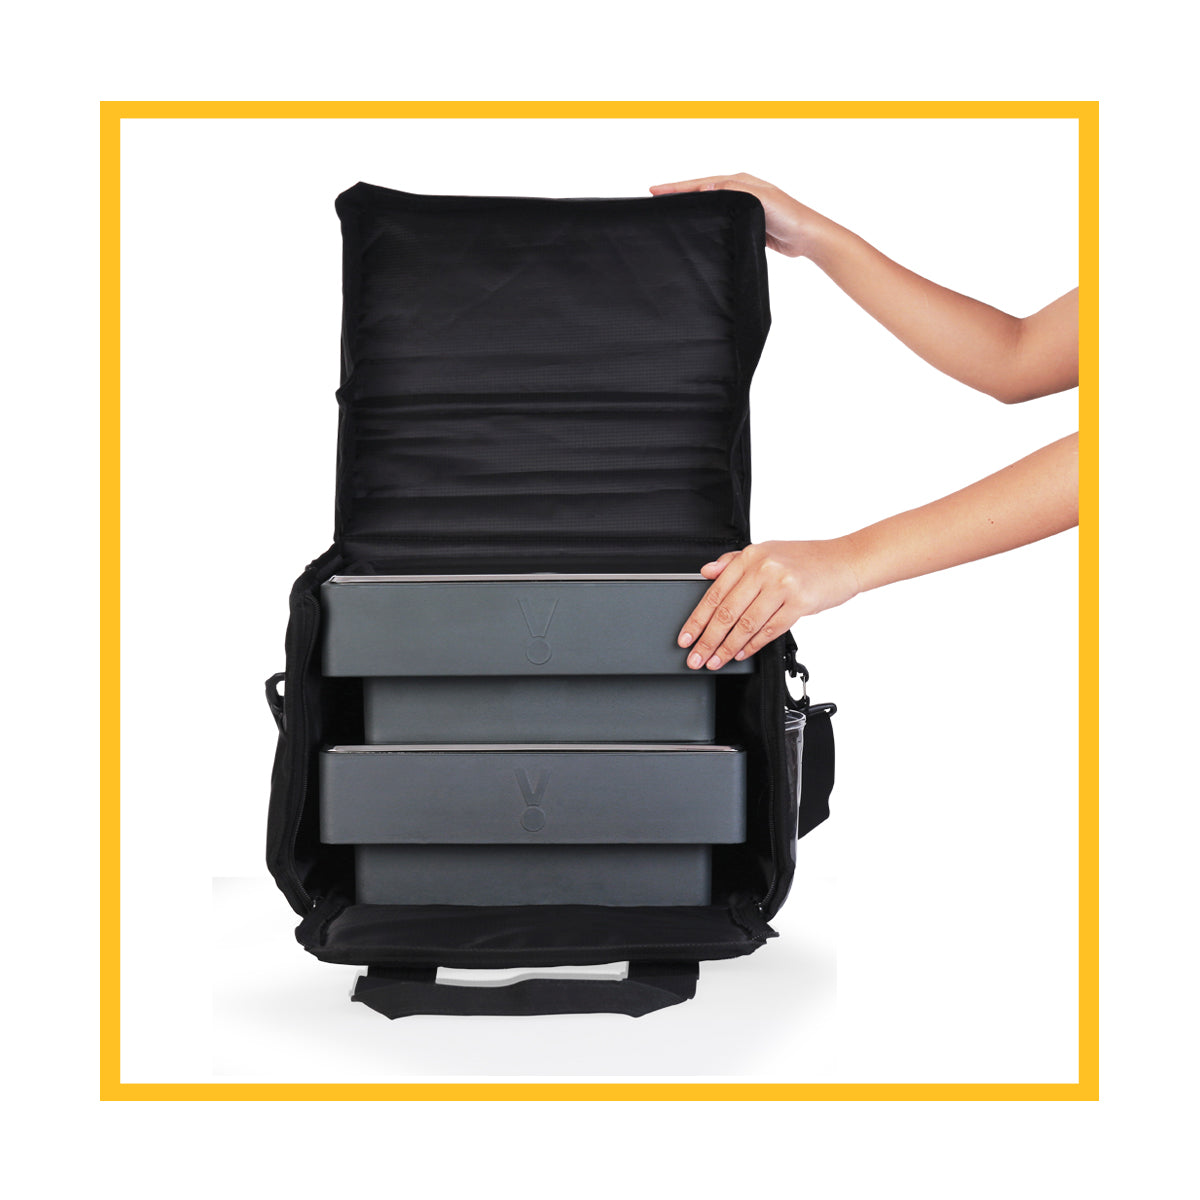 Soft foldable insulated carrying bags brings convenience to transporting Vidacasa® Universal buffetware for offsite catering locations.  Perfect capacity stacking 2 levels of universal buffet trays while it serves as an offsite food reheating station.  Multi-layer protective insulation extends food warming time.